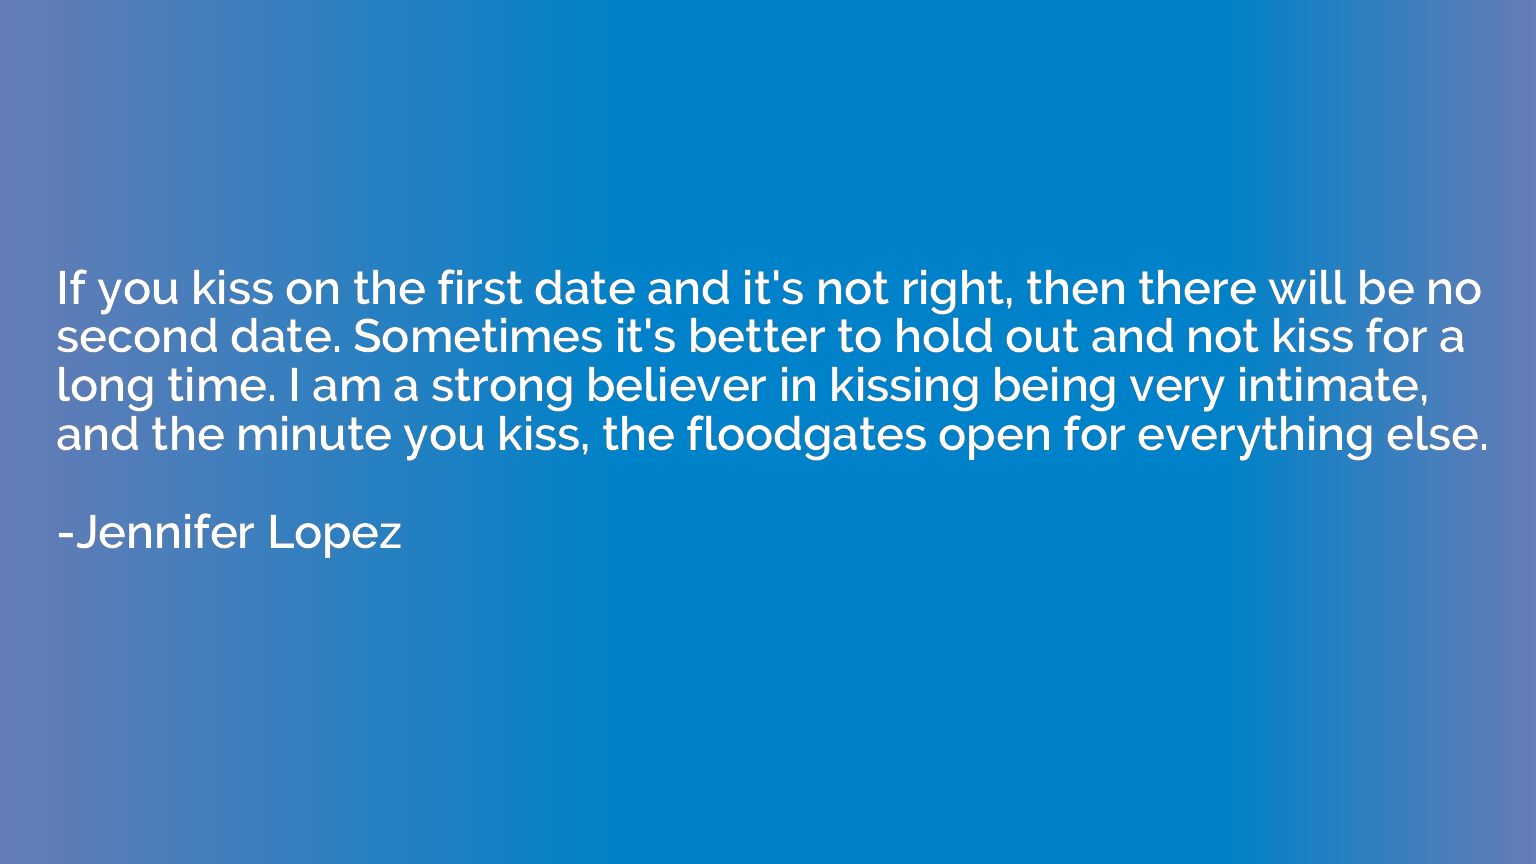 If you kiss on the first date and it's not right, then there